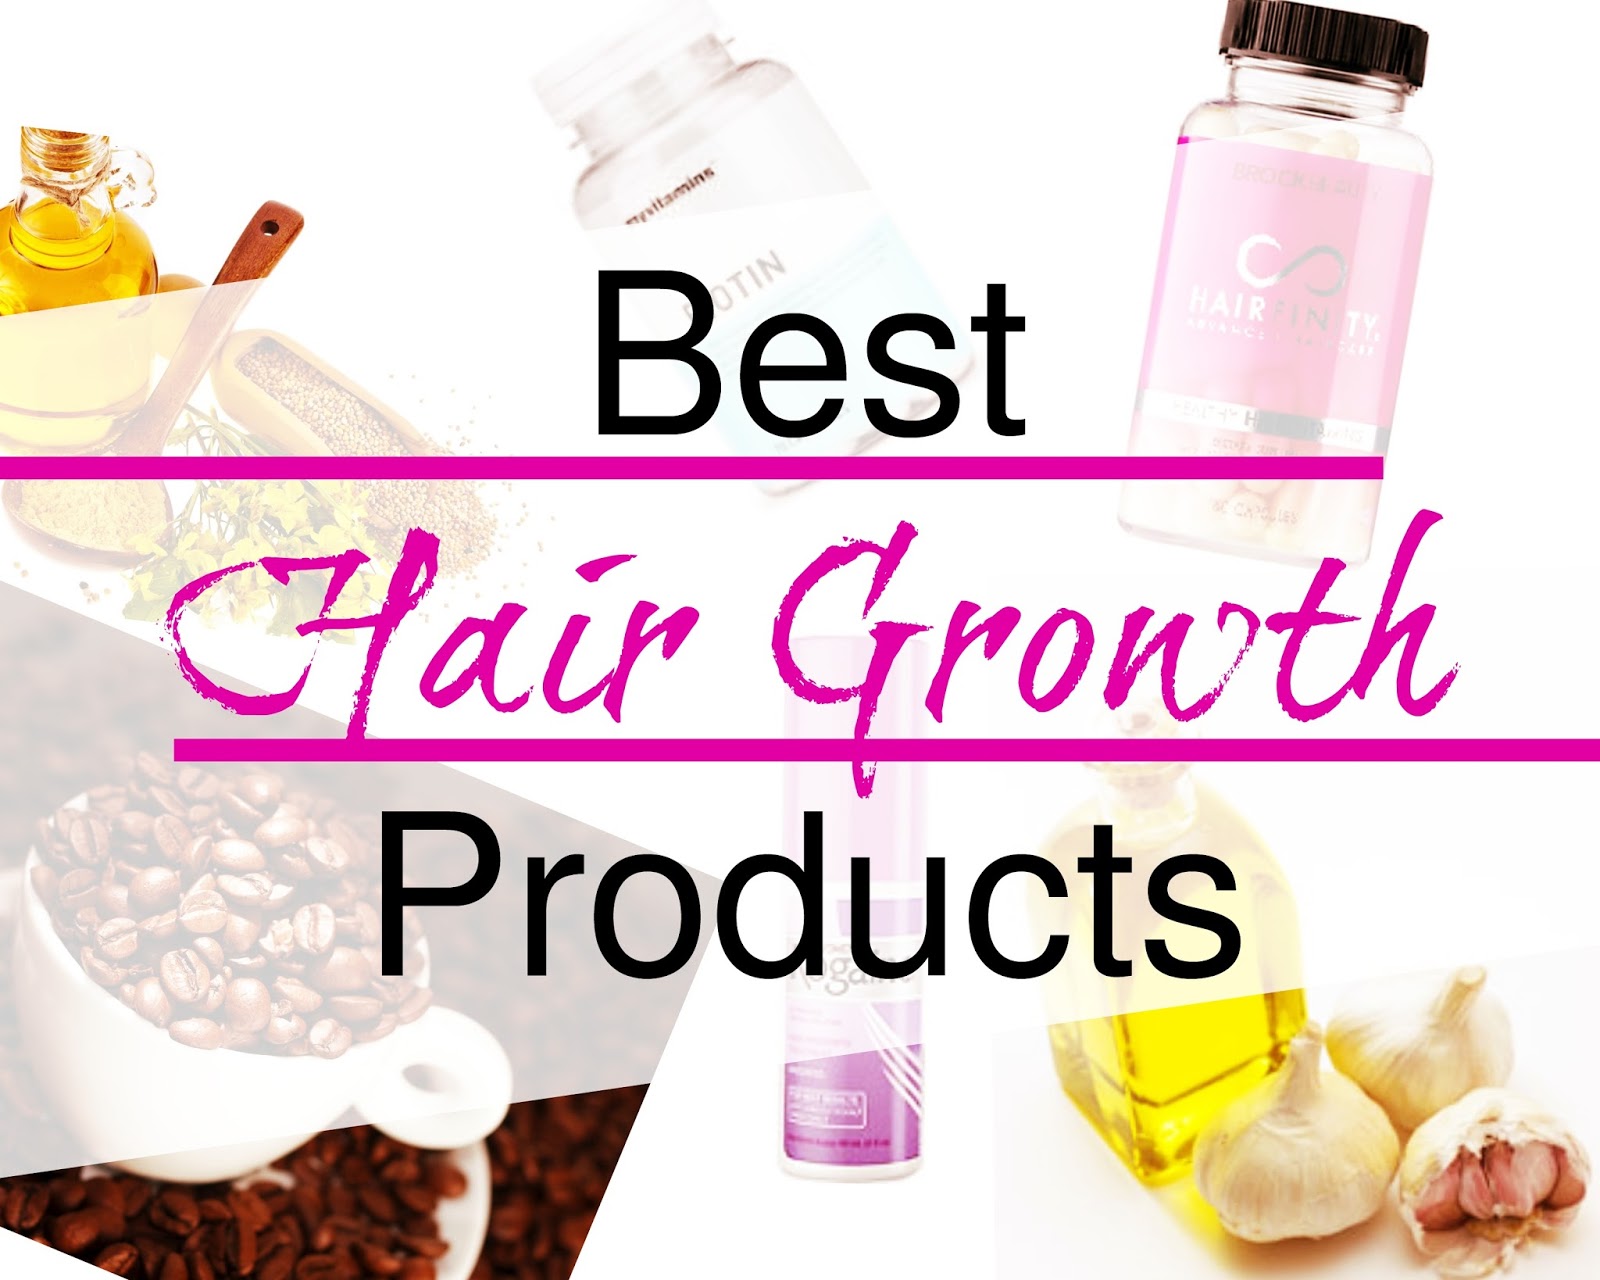 Best Hair Growth Products You Didn't Know You Needed!